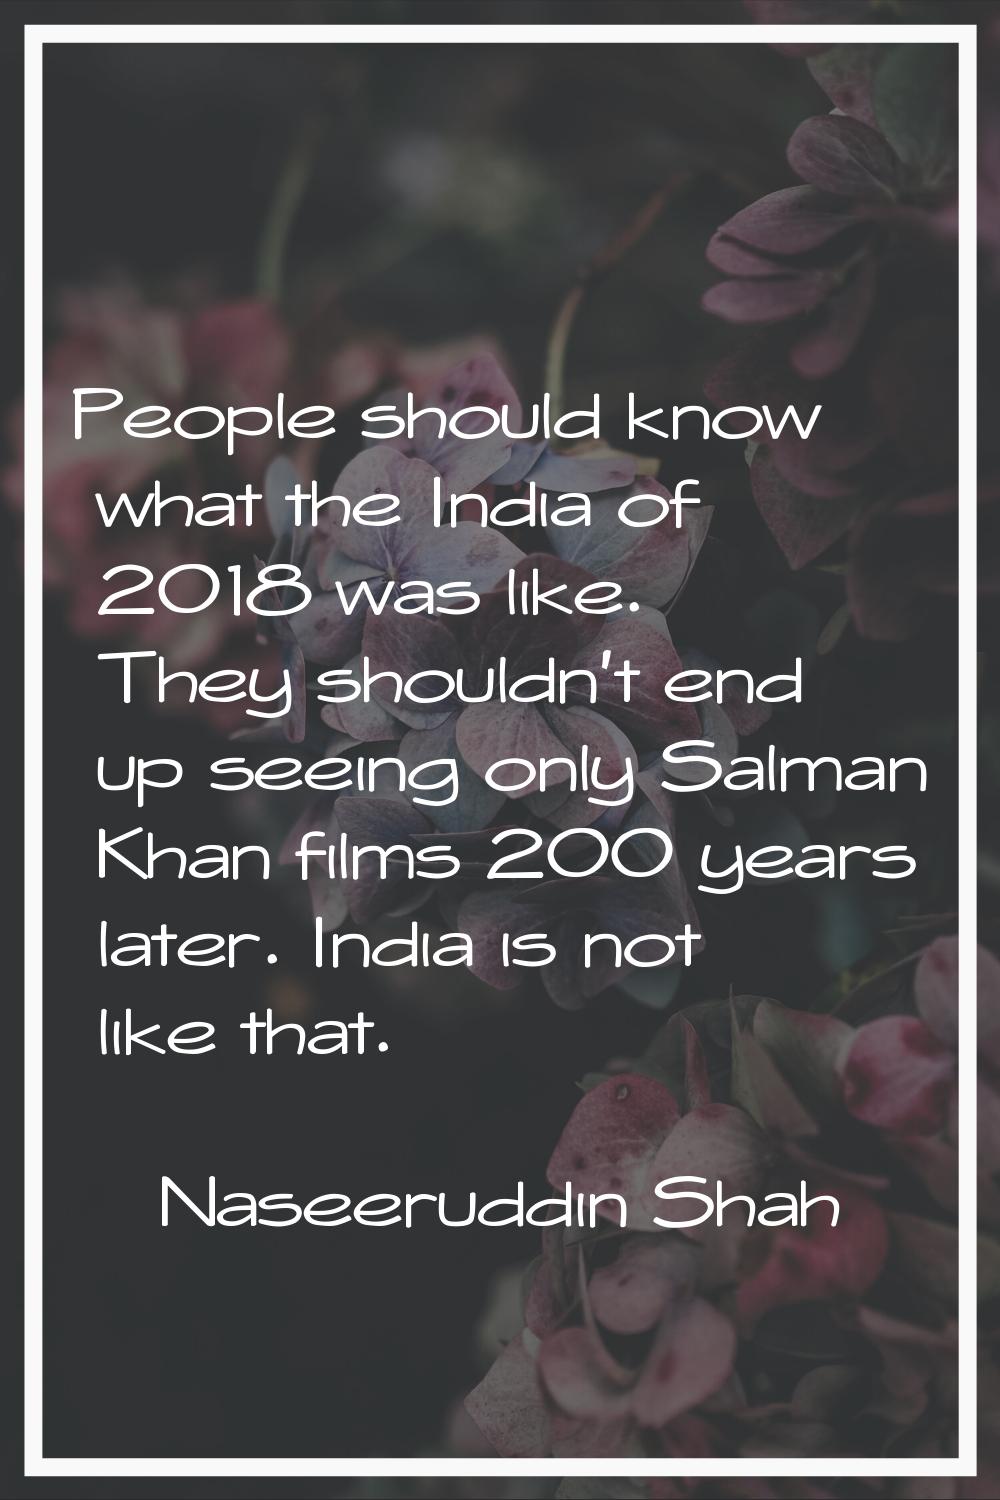 People should know what the India of 2018 was like. They shouldn't end up seeing only Salman Khan f